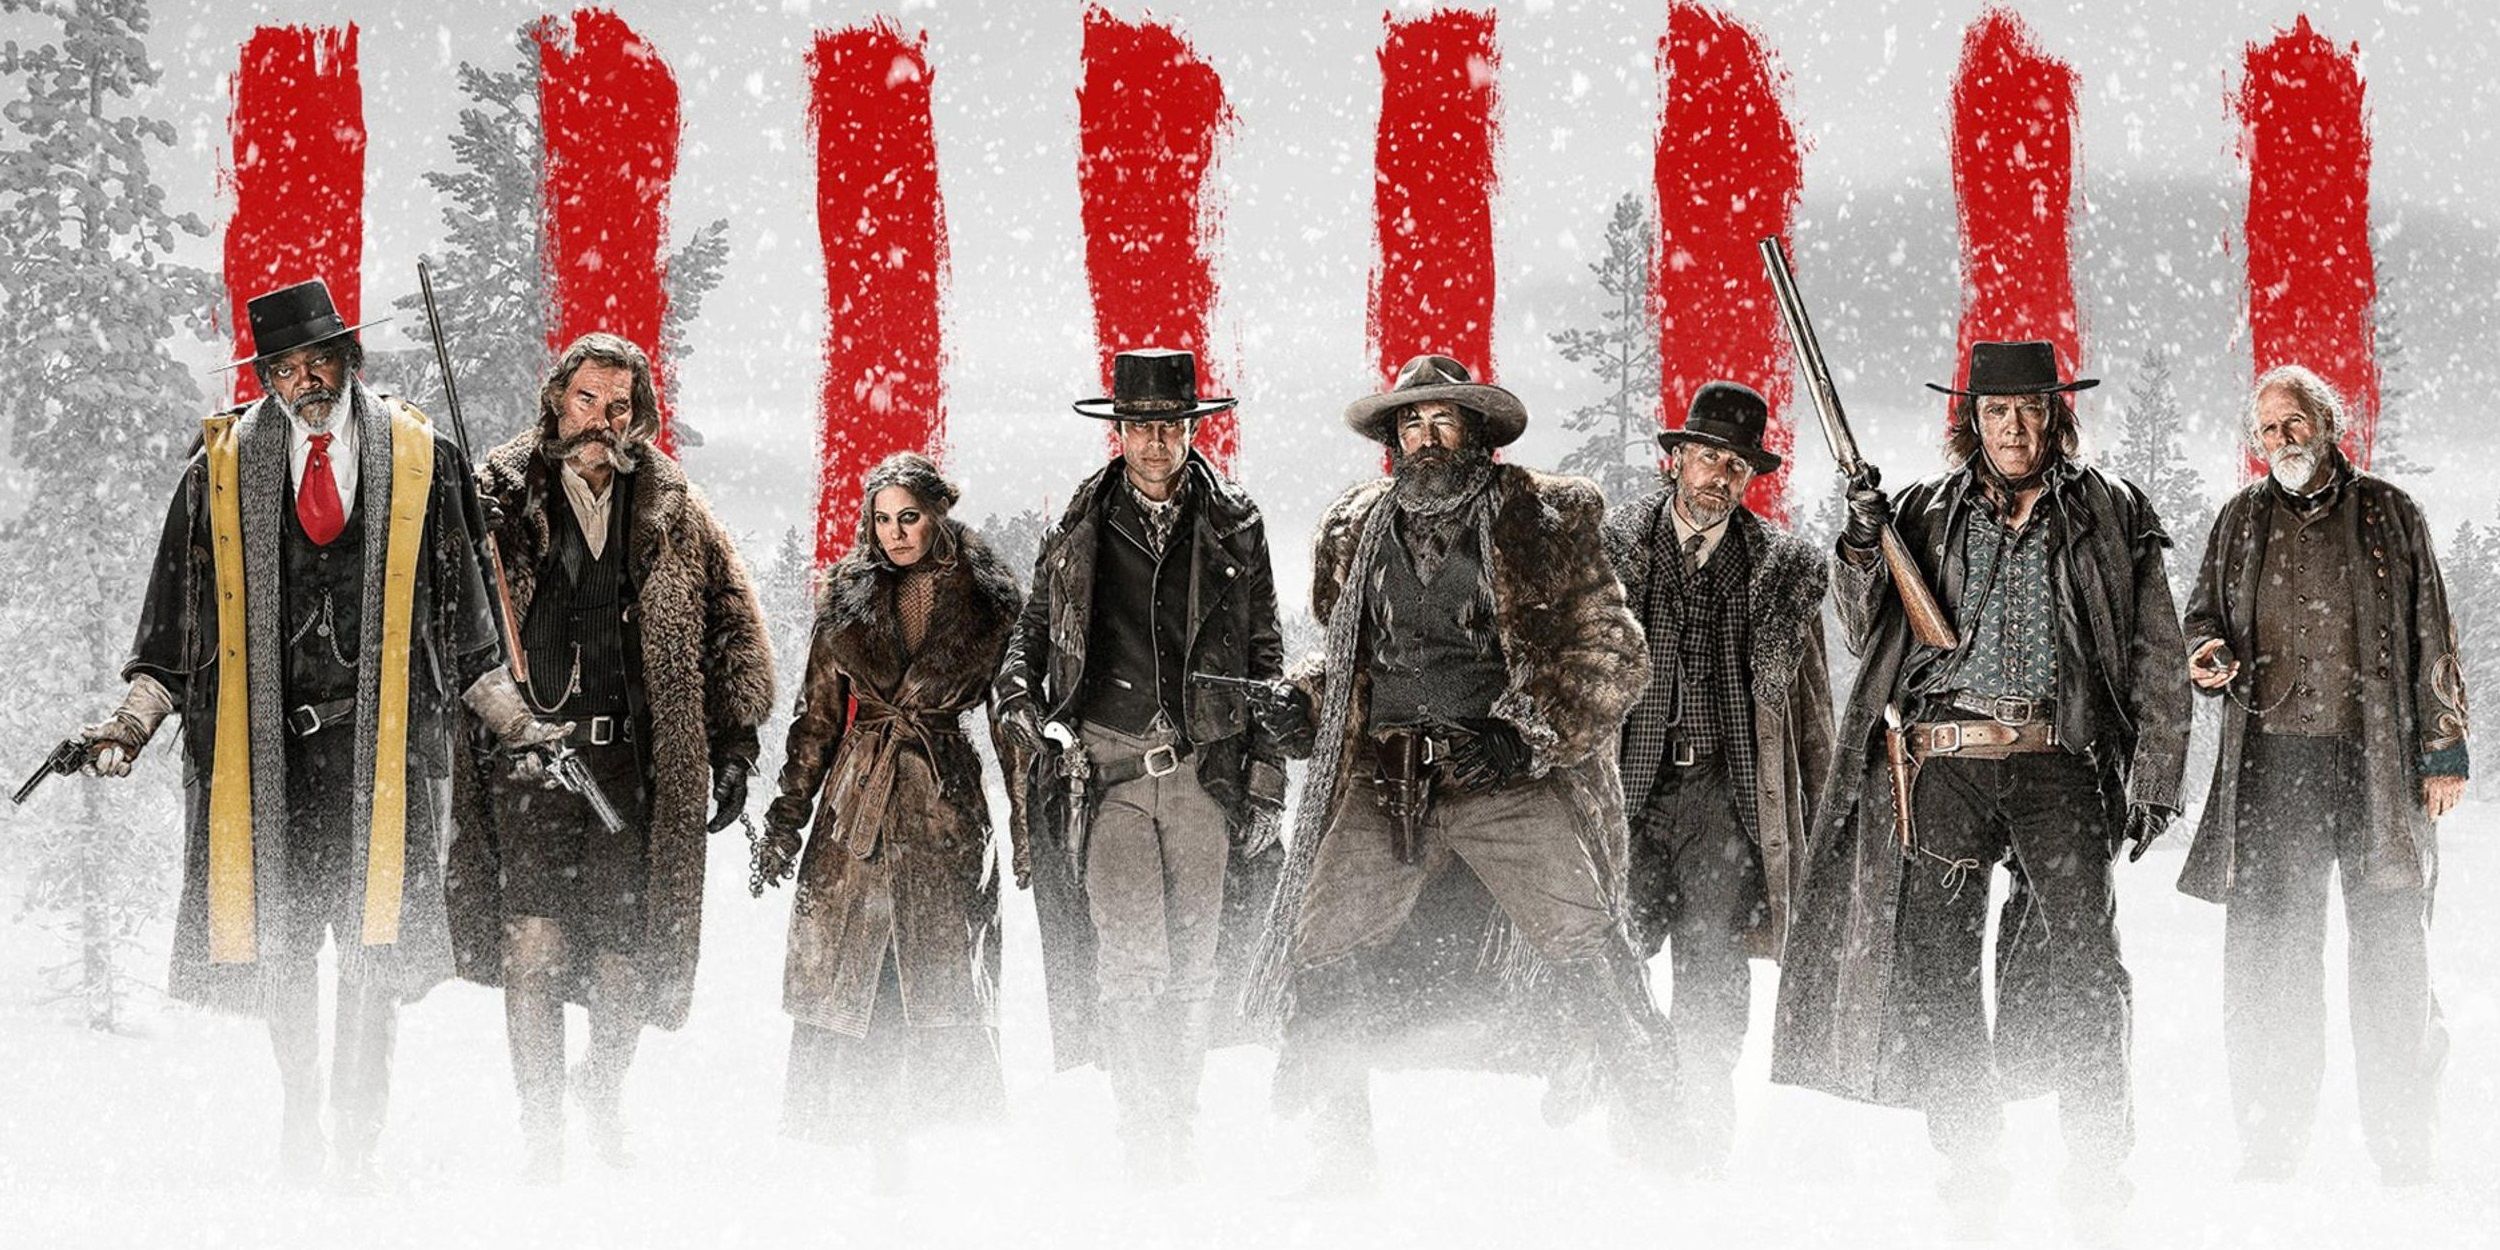 The cast of The Hateful Eight in the snow